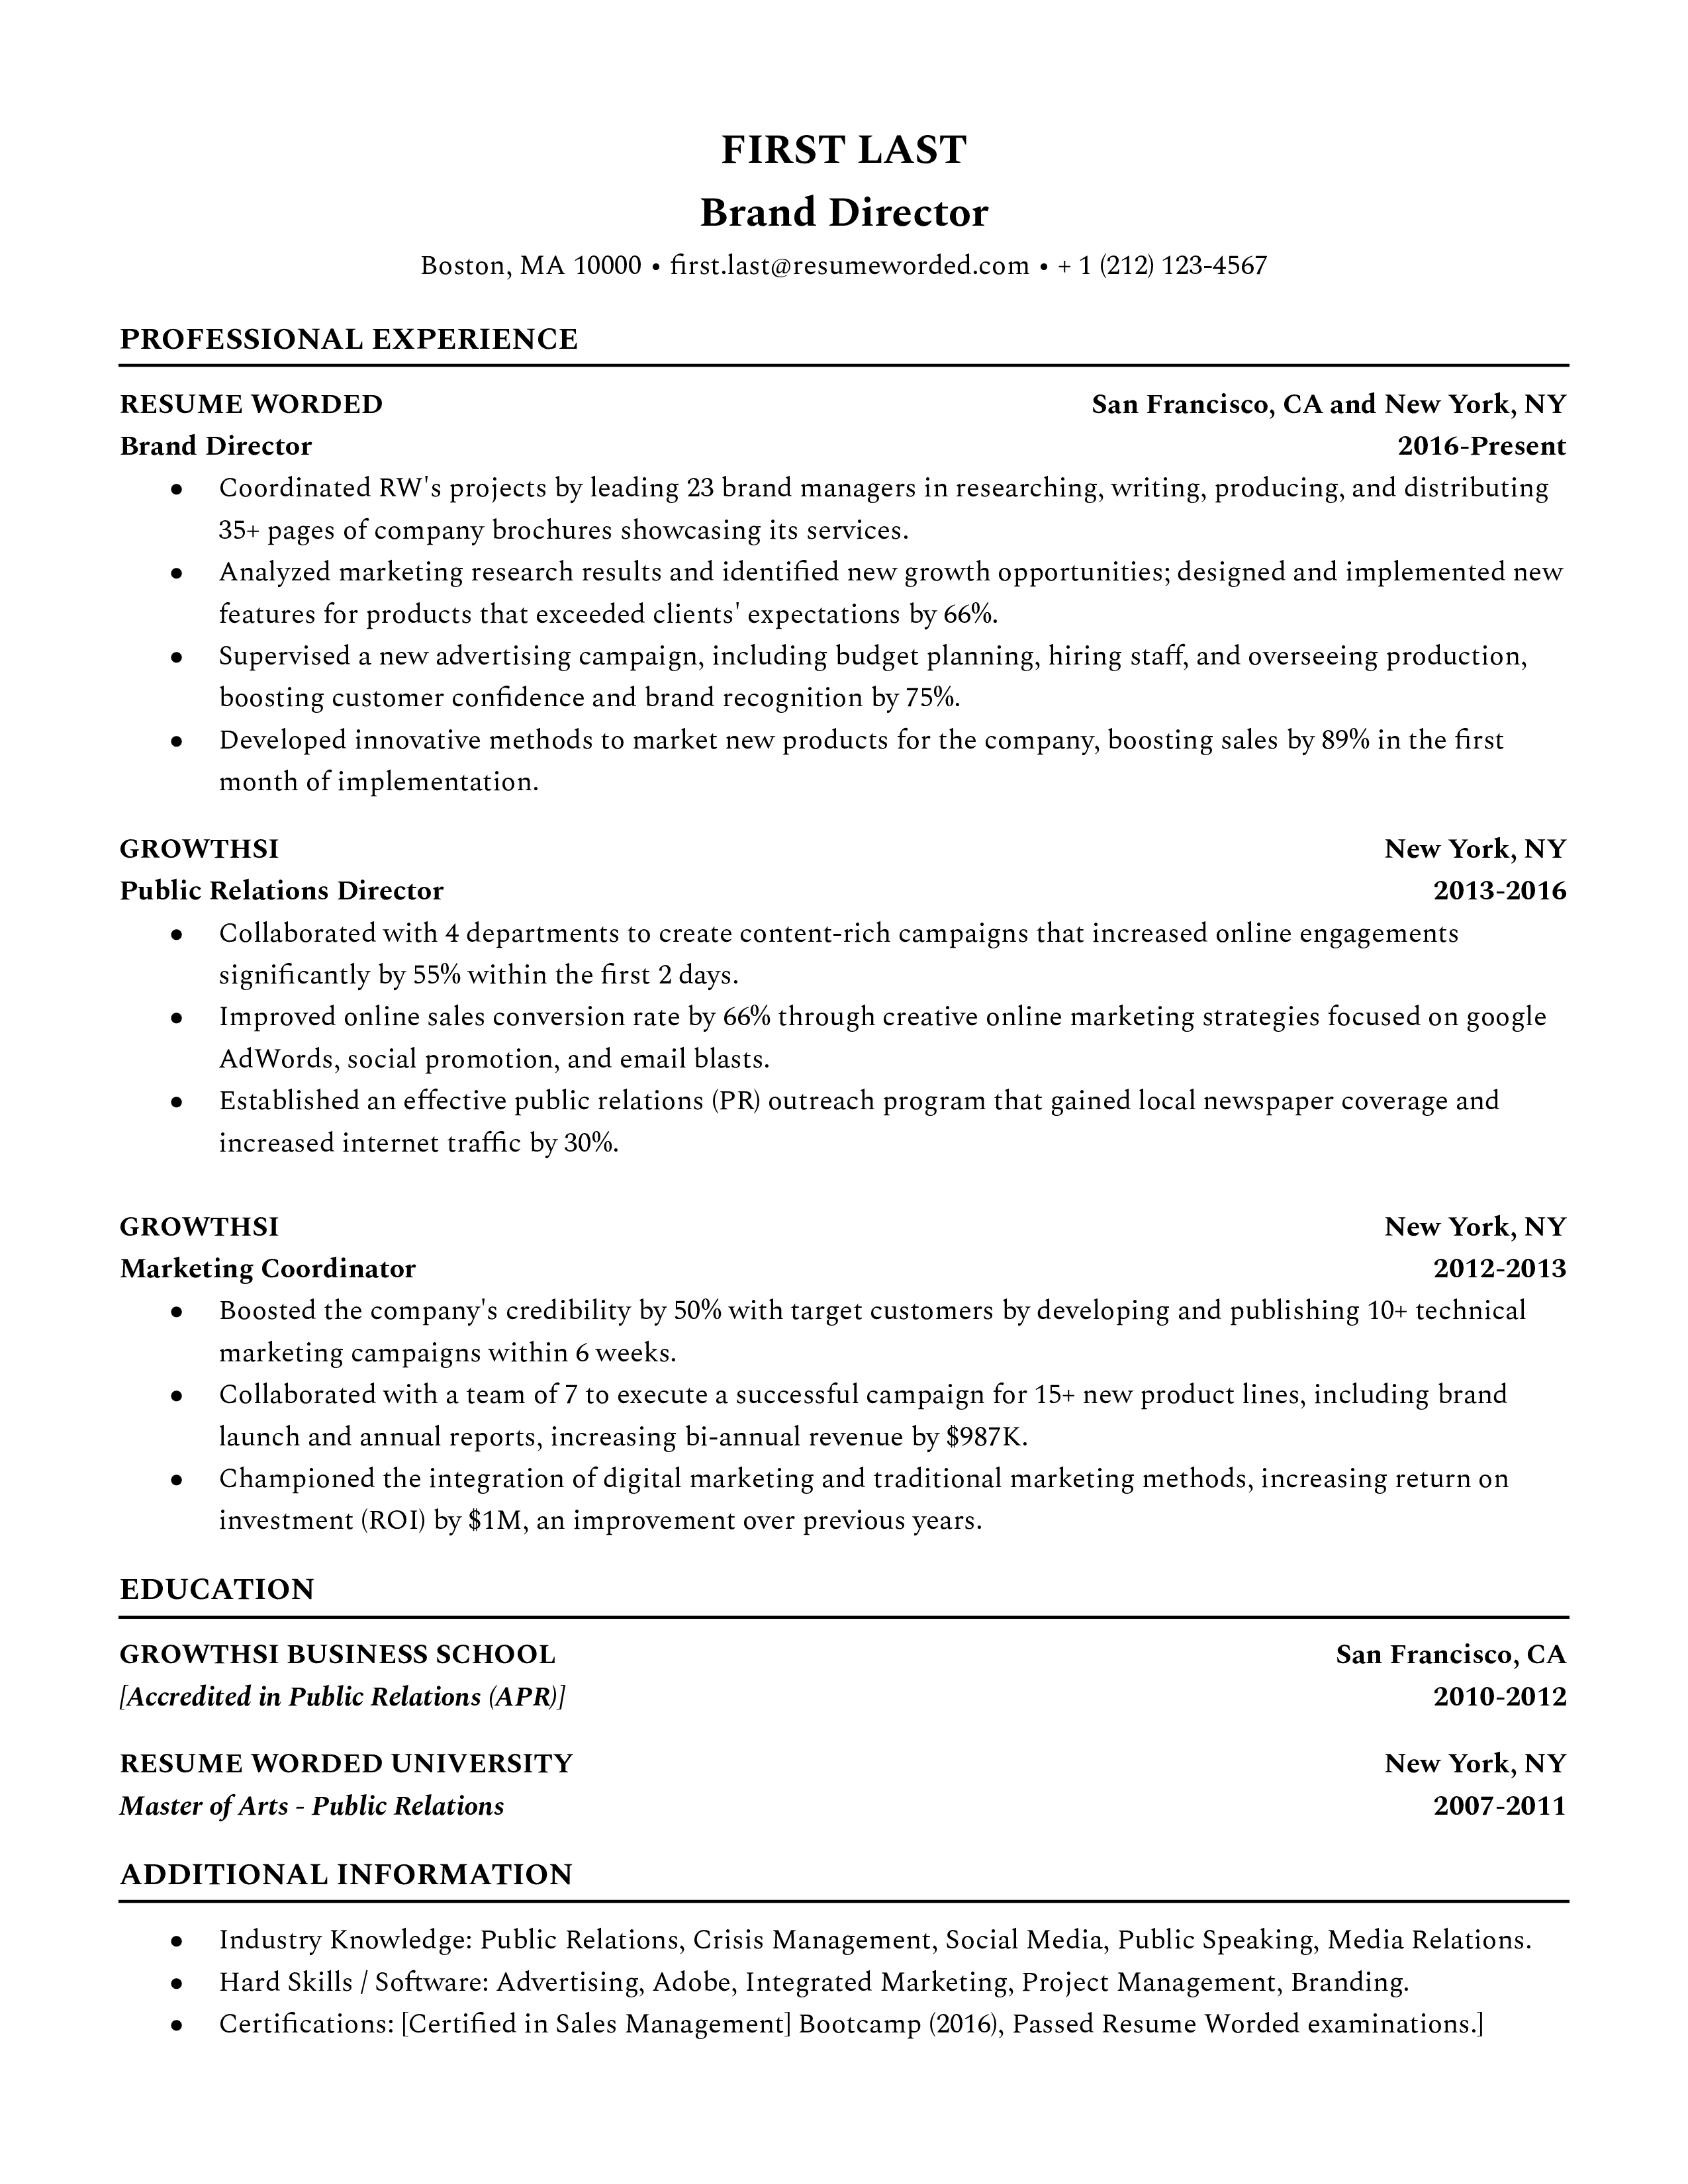 Resume emphasizing experience as a brand director, including responsibility for overseeing brand strategy, managing a team of specialists, and ensuring the delivery of successful brand initiatives